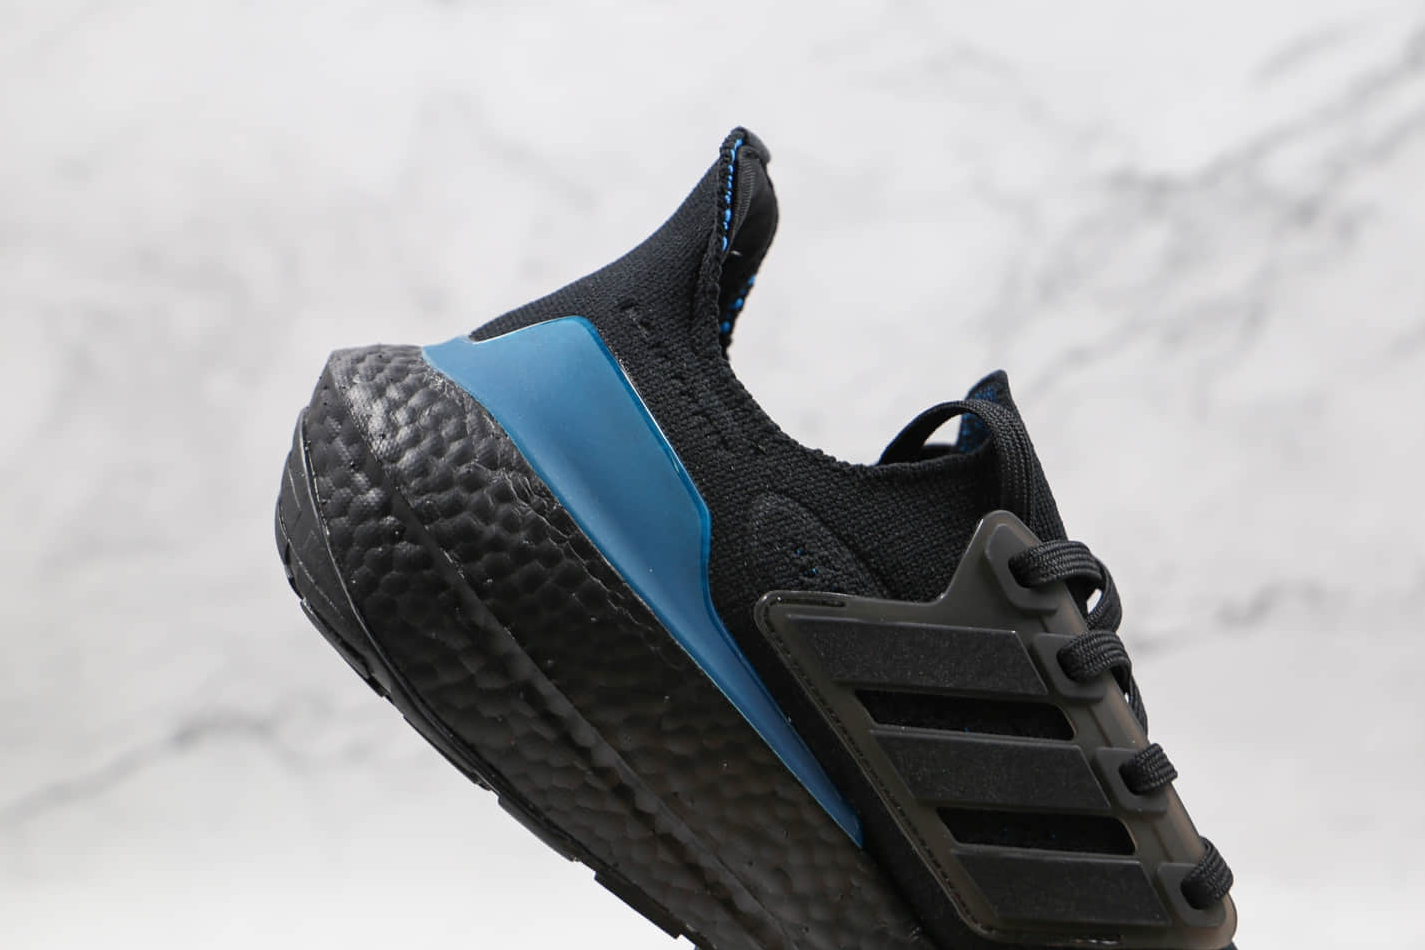 Adidas UltraBoost 21 Black Active Teal FZ1921 - Latest Release at Best Price